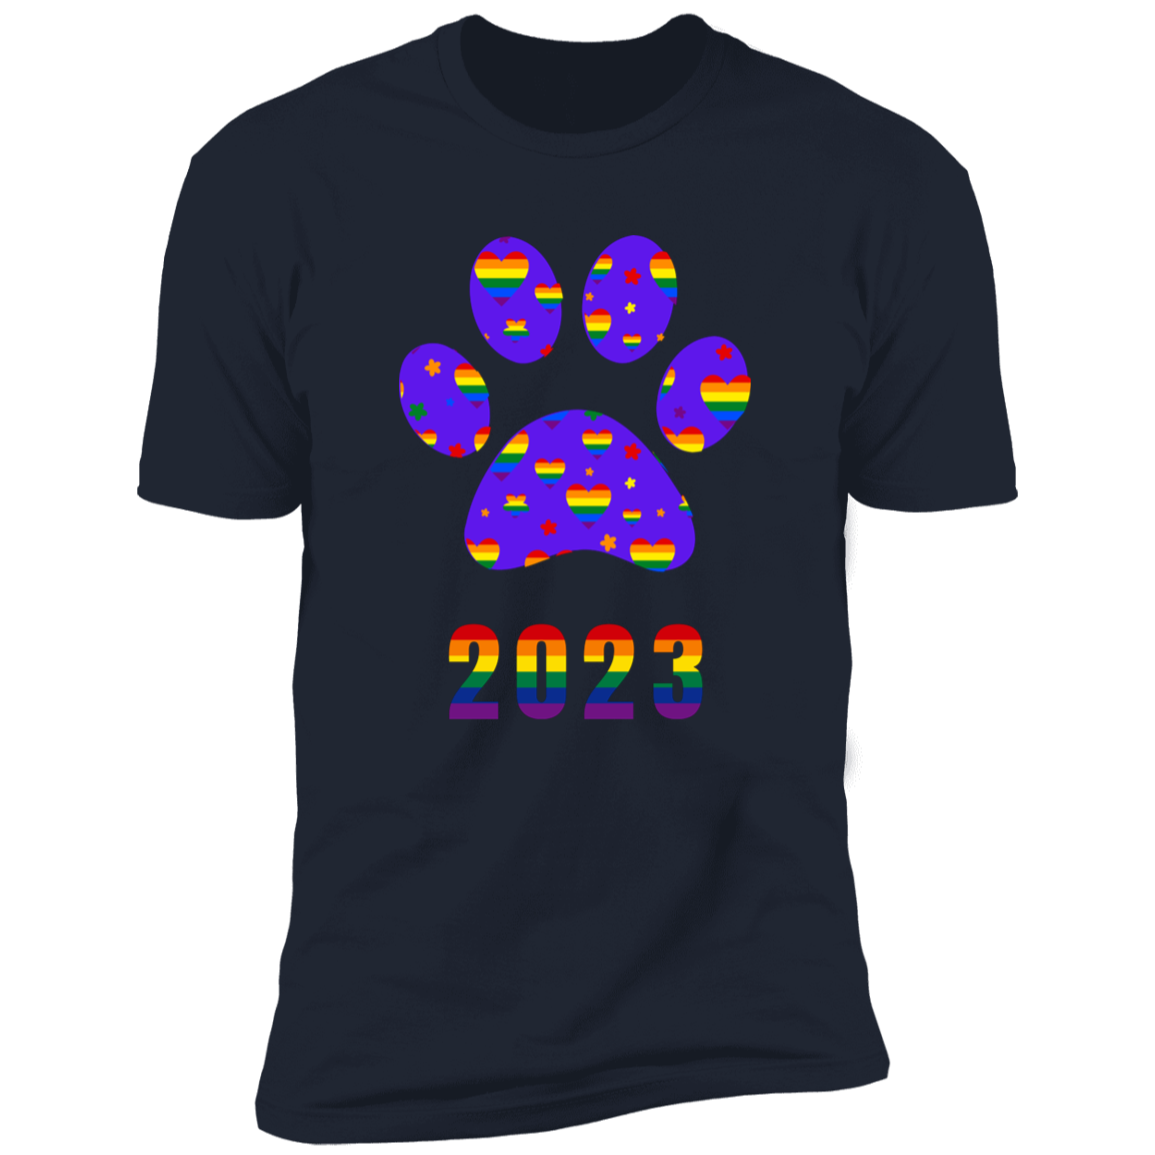 Pride Paw 2023 (Hearts) Pride T-shirt, Paw Pride Dog Shirt for humans, in navy blue